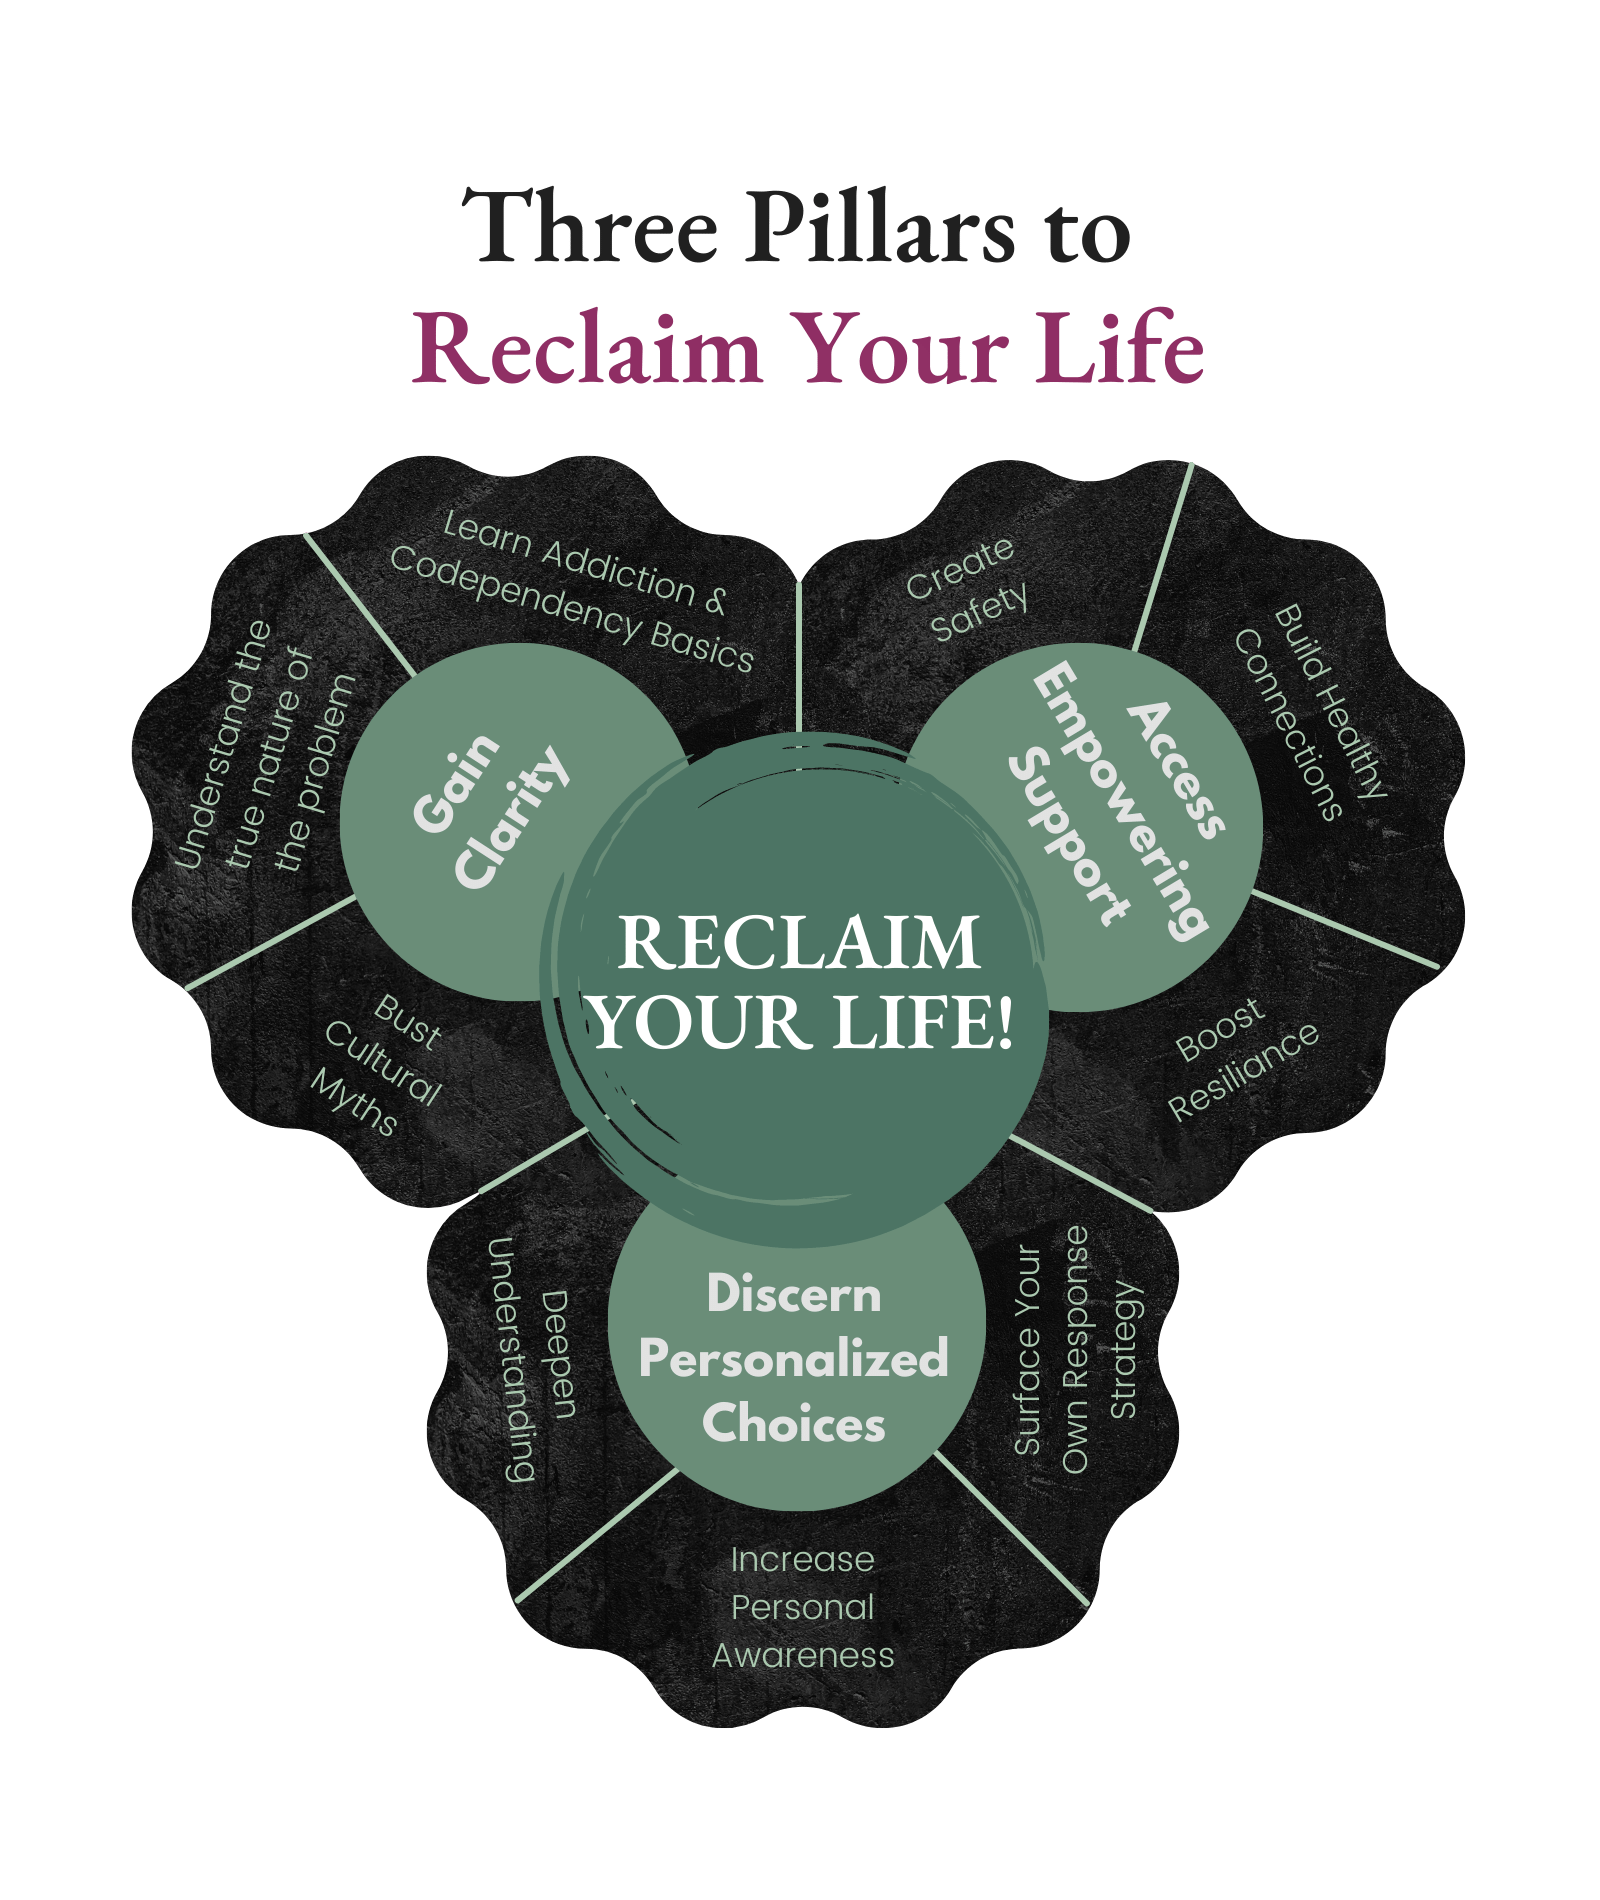 Reclaim Your Life Framework - Details in the text below the image. 